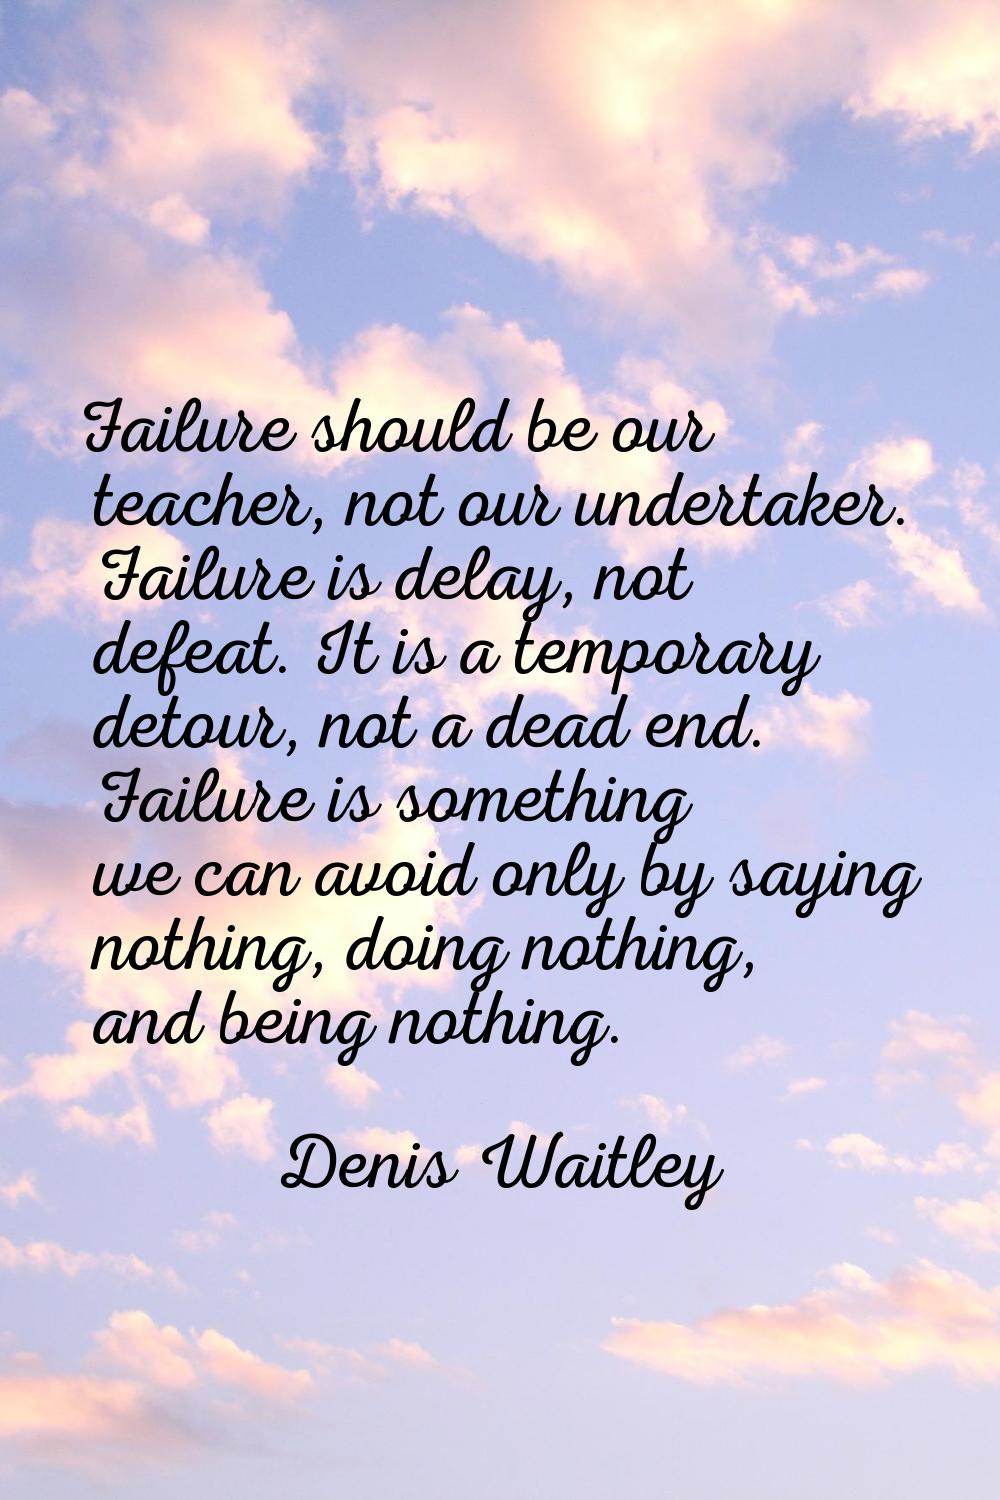 Failure should be our teacher, not our undertaker. Failure is delay, not defeat. It is a temporary 